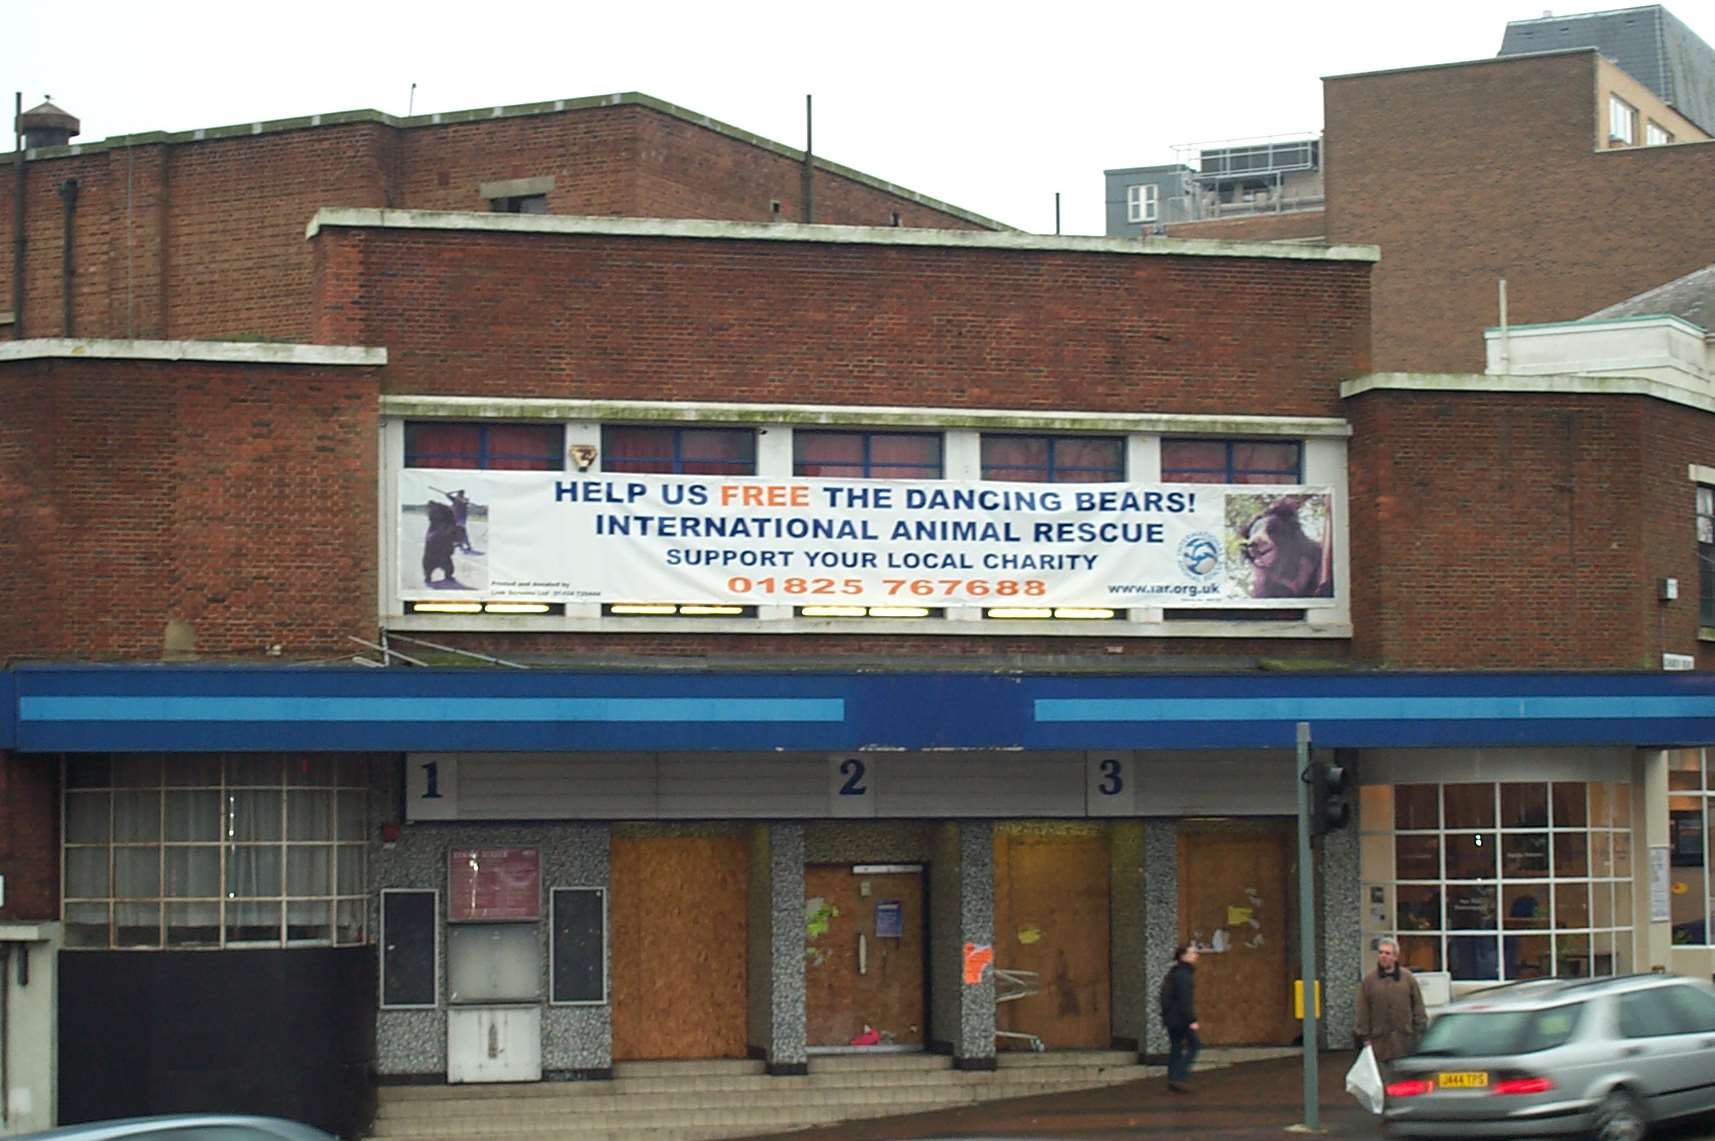 Work has started on the former ABC cinema in Tunbridge Wells town centre